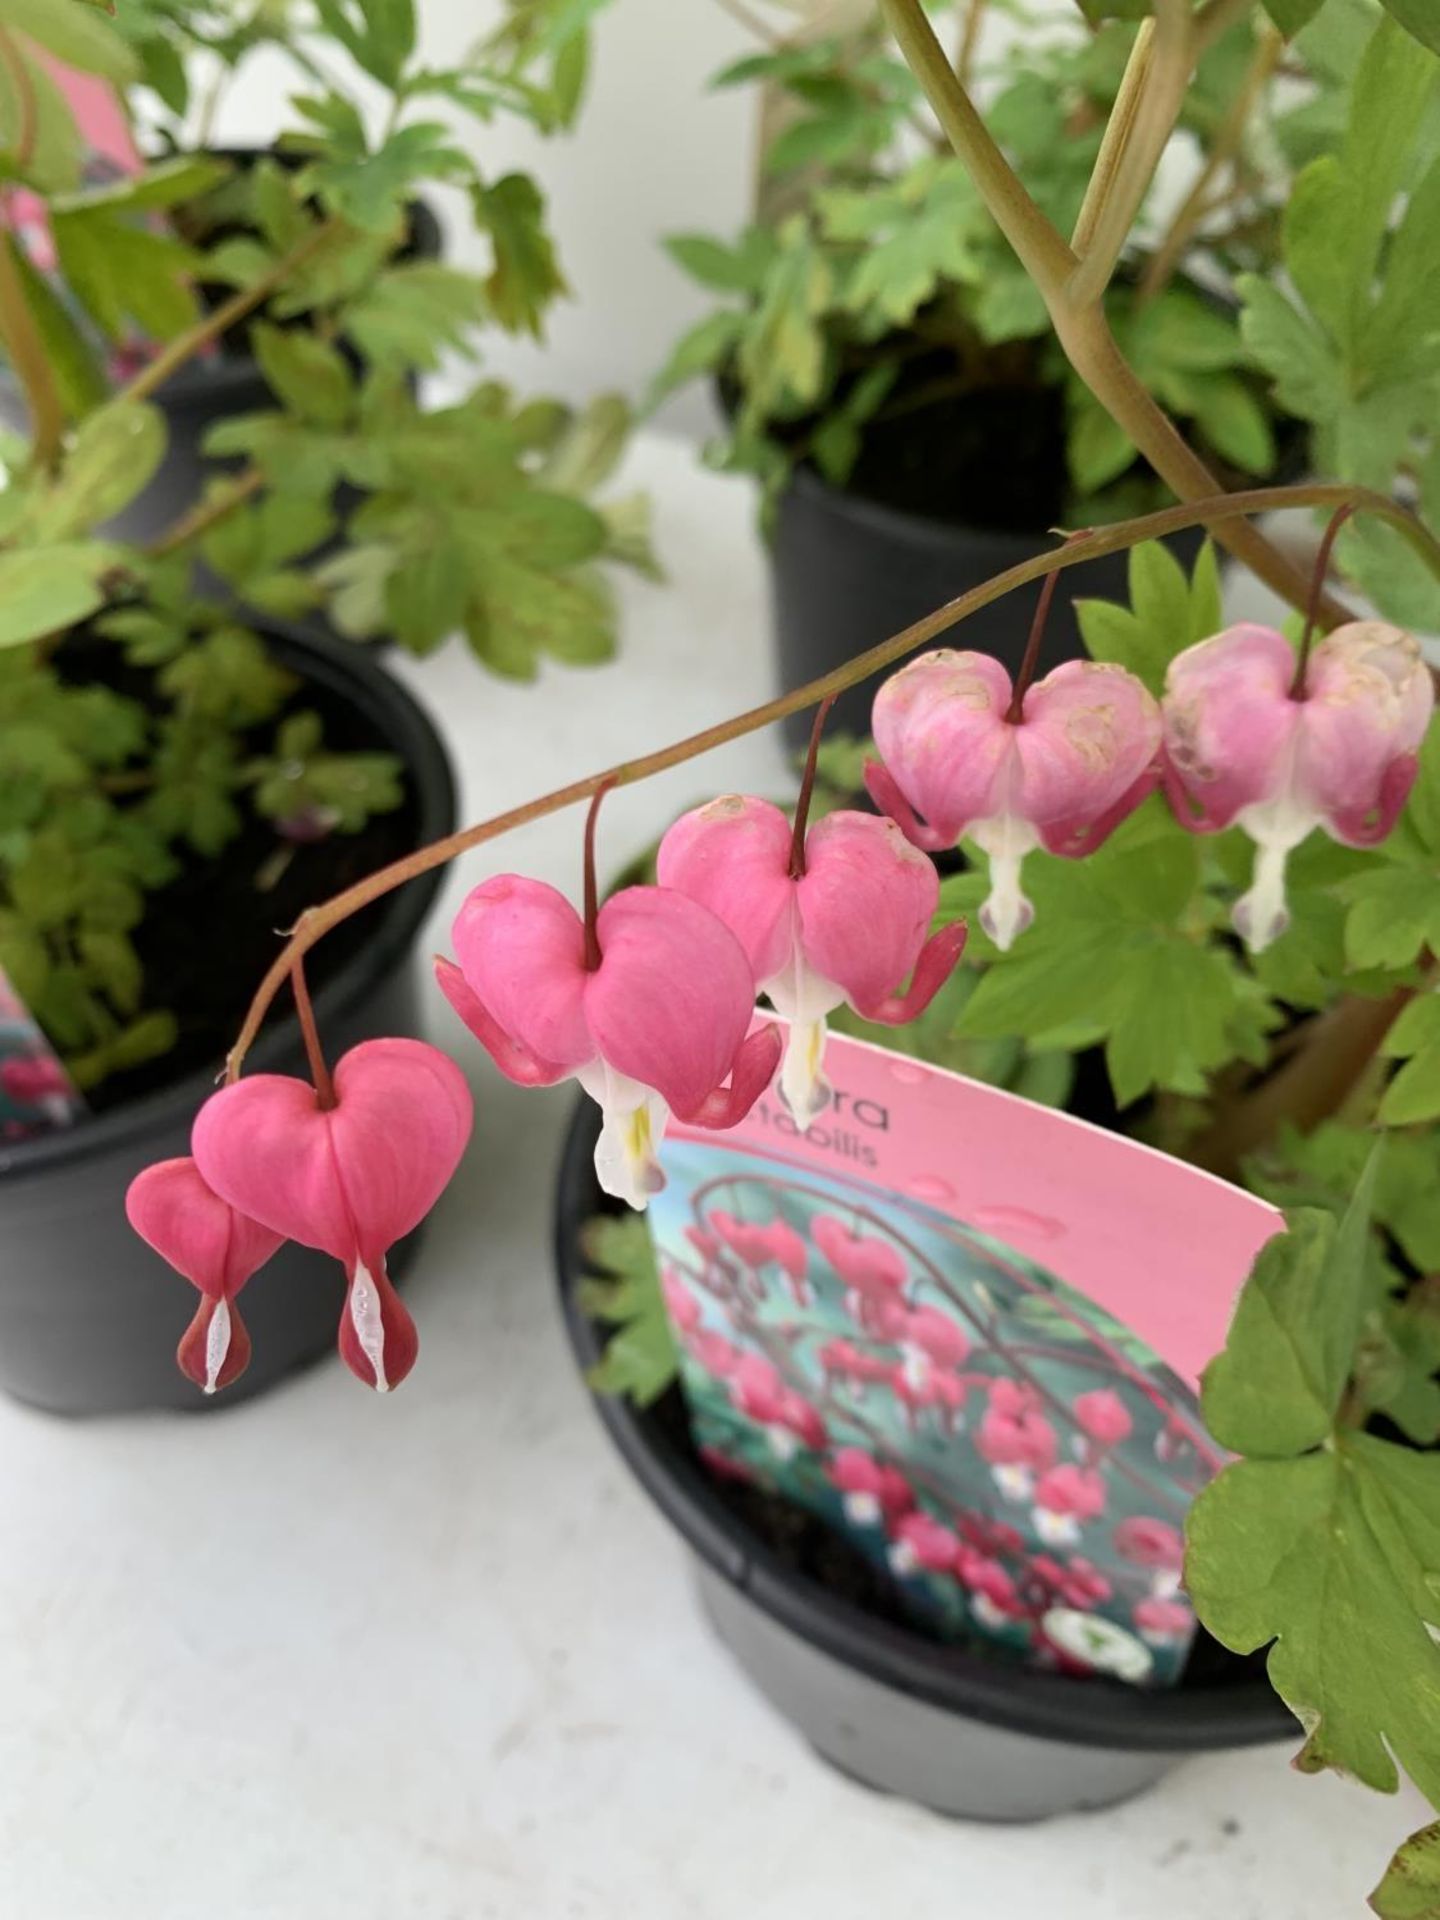 SIX DICENTRA SPECTABILIS BLEEDING HEART 50CM TALL IN 2 LTR POTS TO BE SOLD FOR THE SIX PLUS VAT - Image 11 of 11